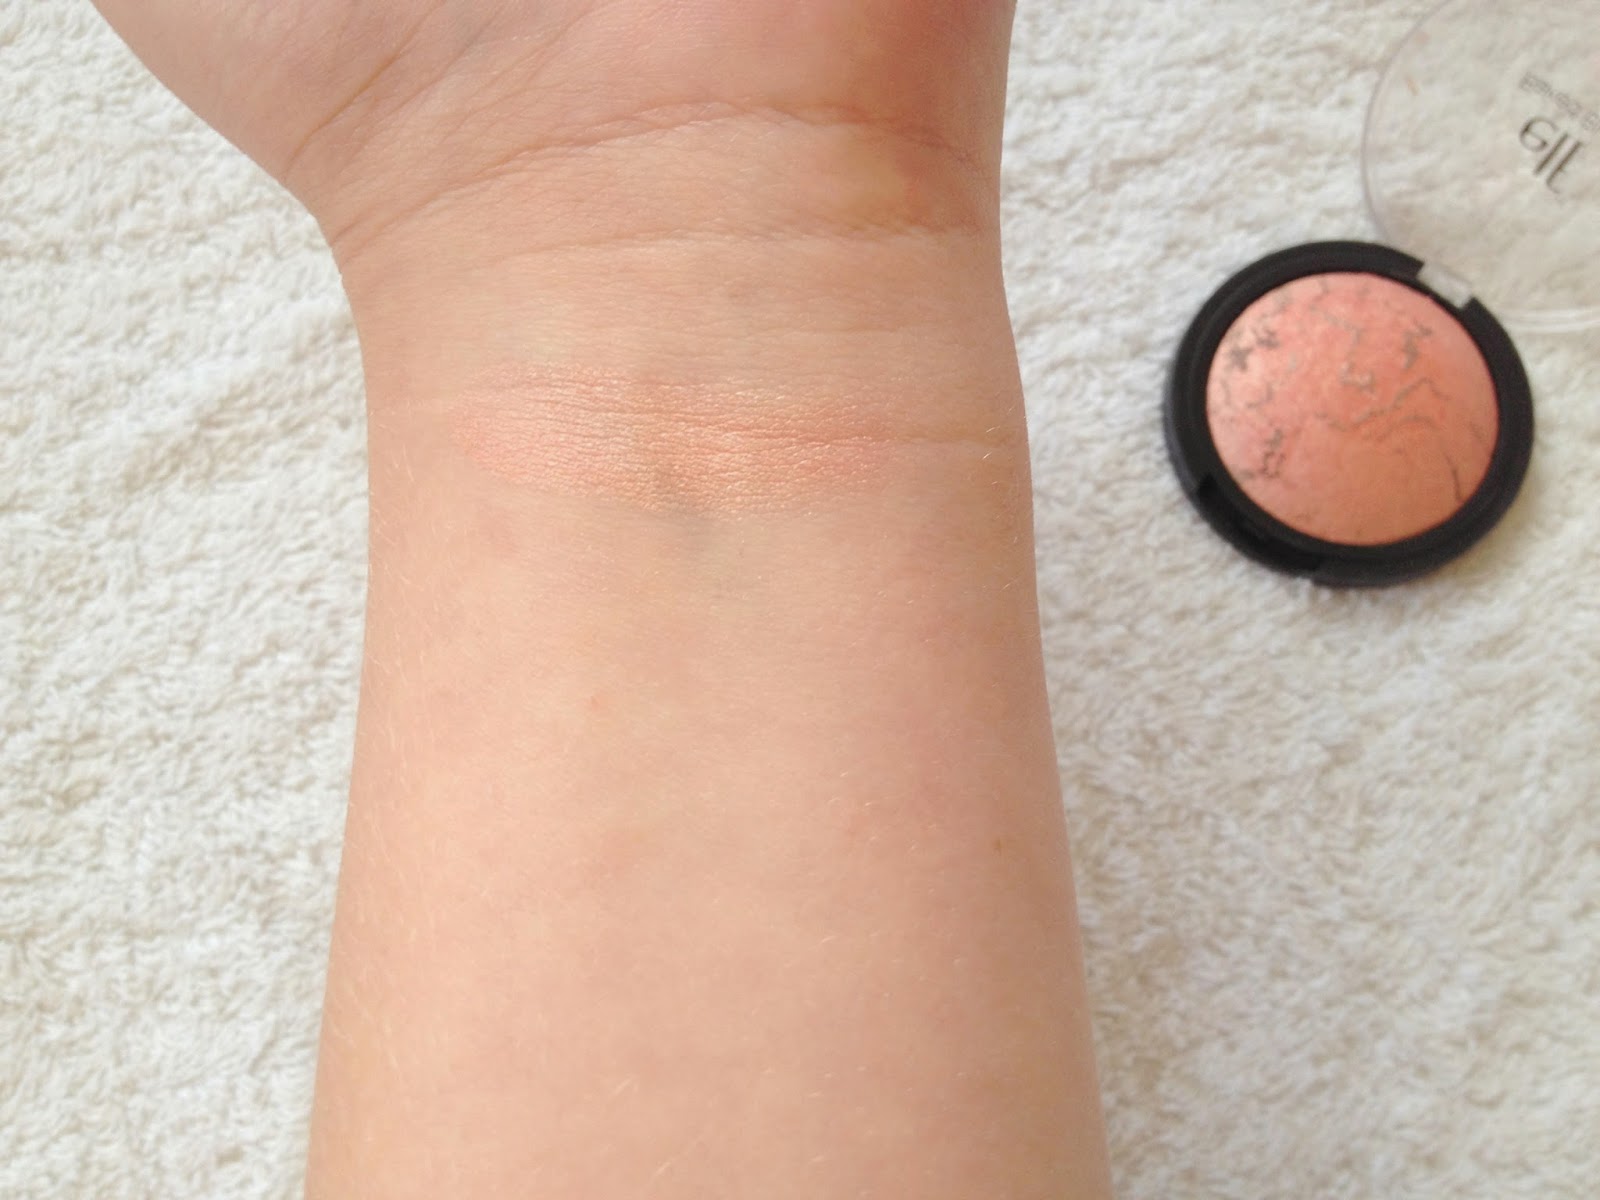 Elf Baked Blush in Peachy Cheeky Swatch